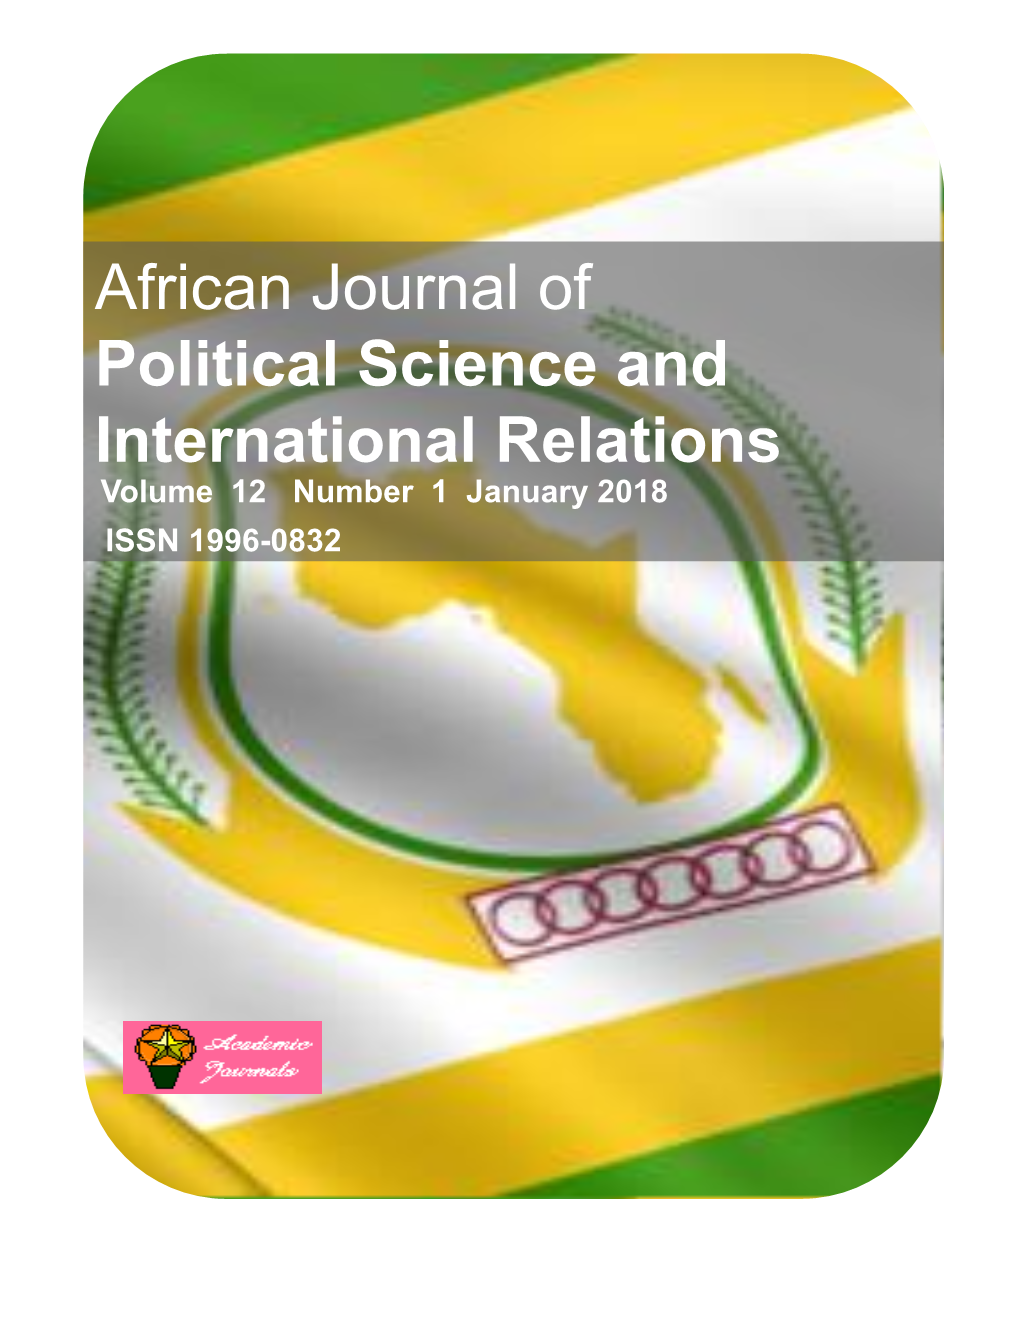 African Journal of Political Science and International Relations Volume 12 Number 1 January 2018 ISSN 1996-0832